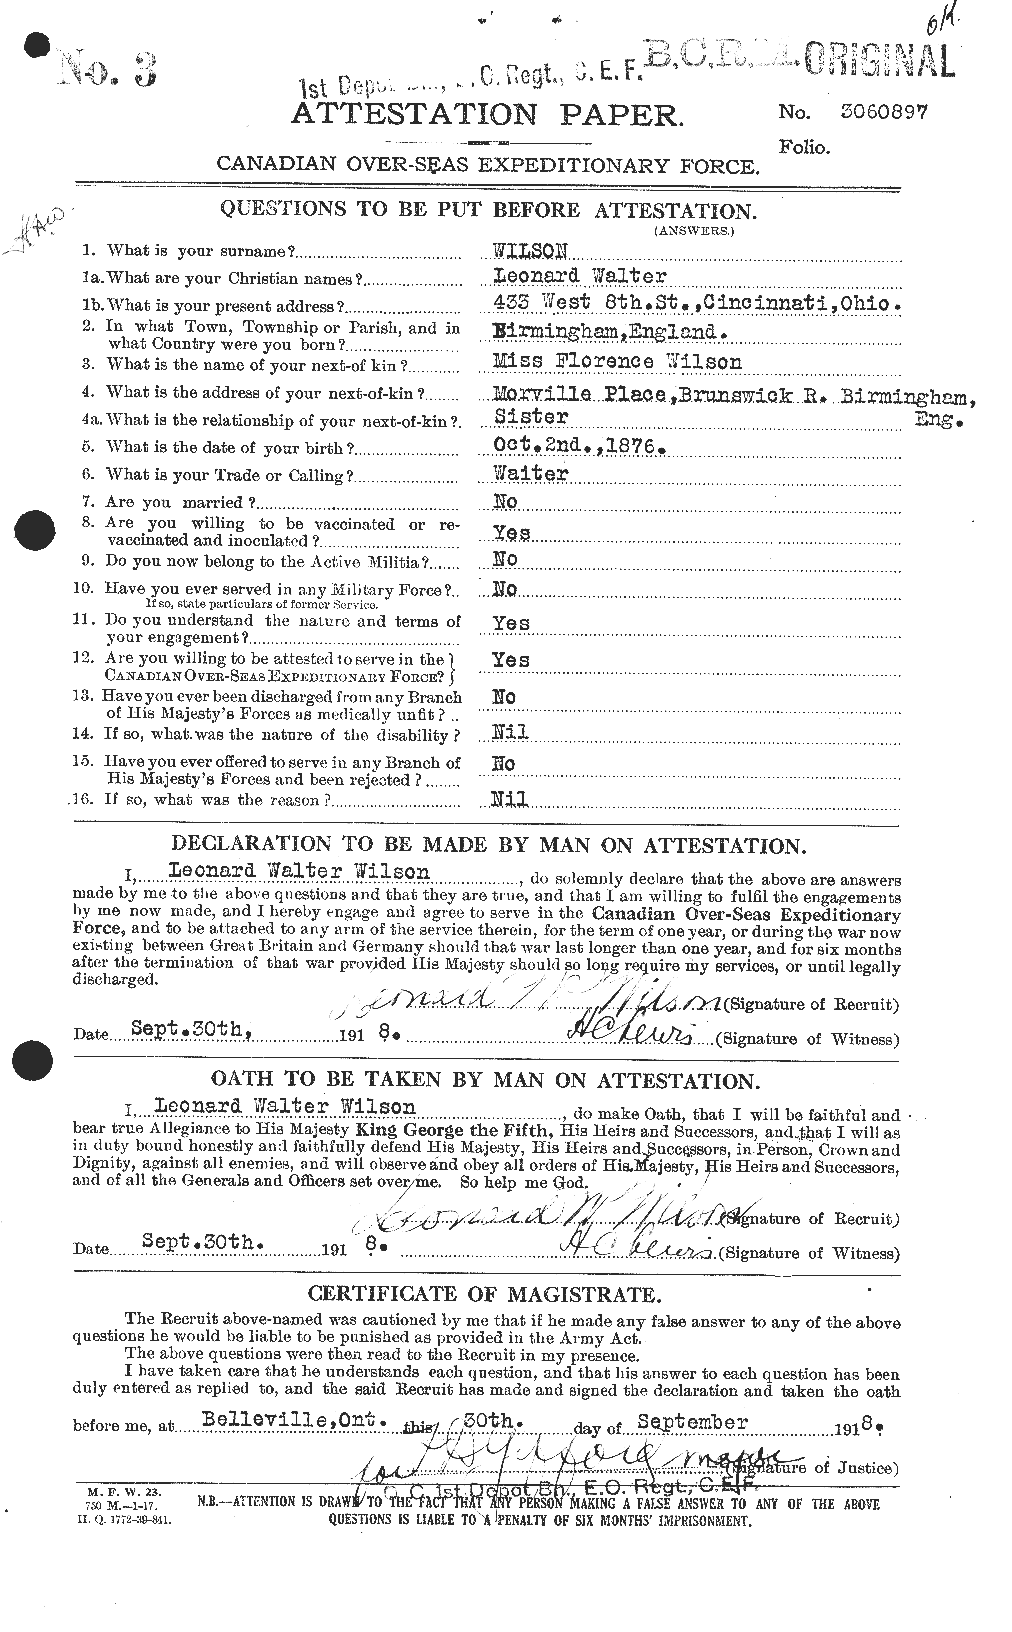 Personnel Records of the First World War - CEF 678642a